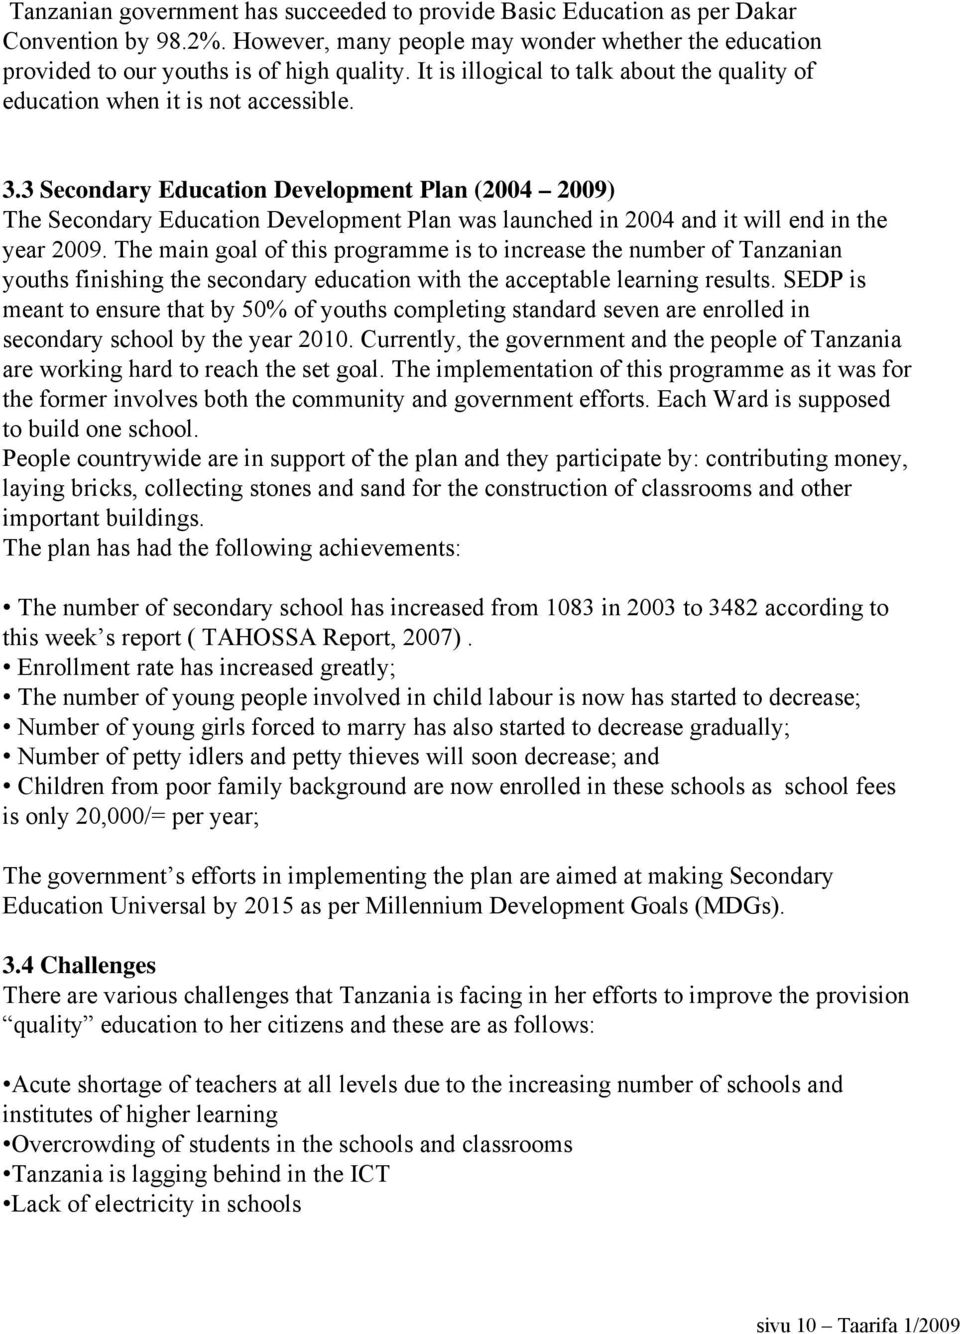 3 Secondary Education Development Plan (2004 2009) The Secondary Education Development Plan was launched in 2004 and it will end in the year 2009.